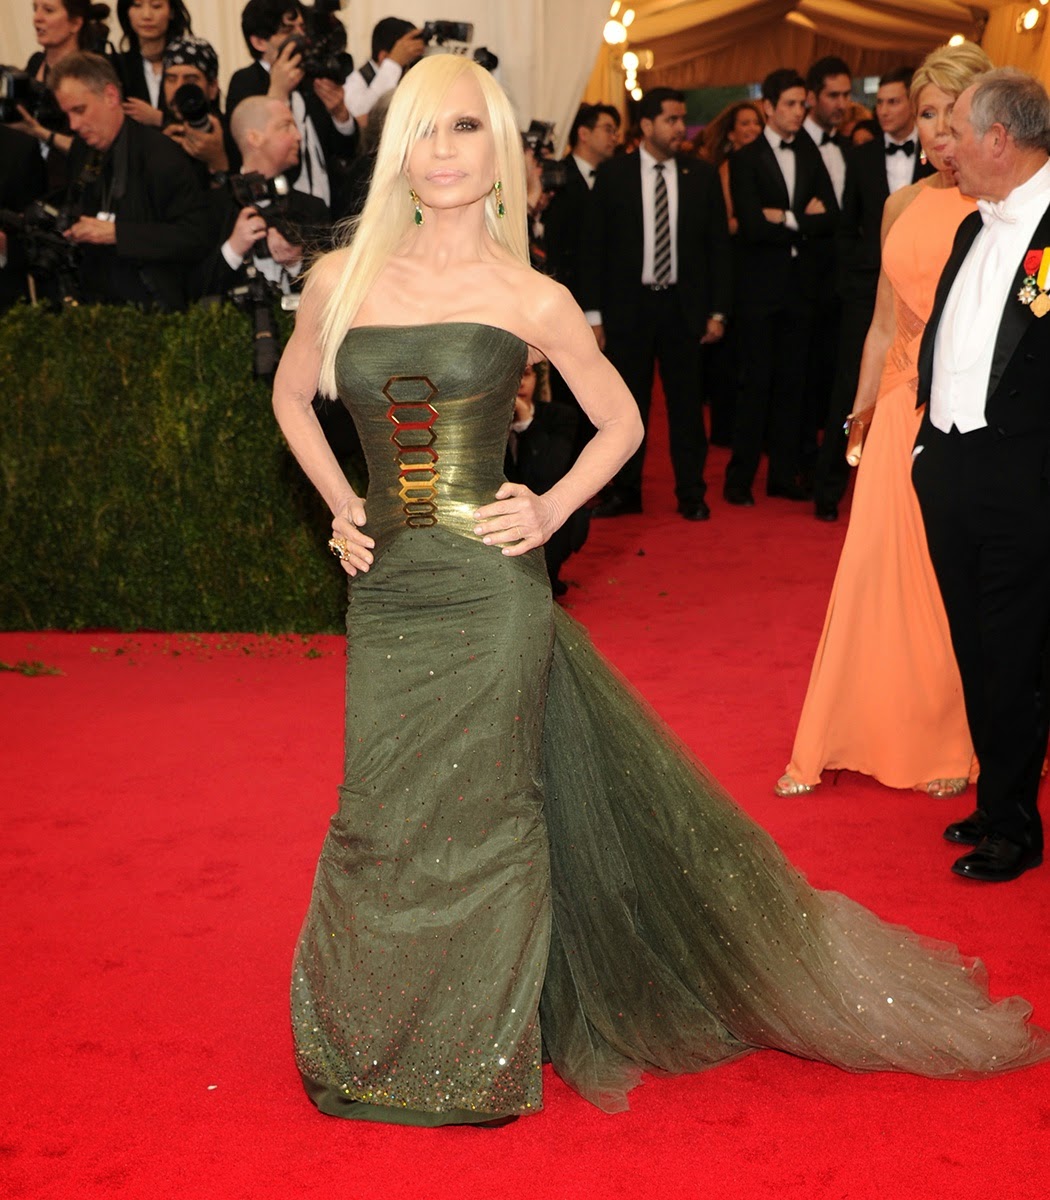 Worked Her Dress Or Looked A Mess: The Met Gala 2014 | Orange Juice and ...